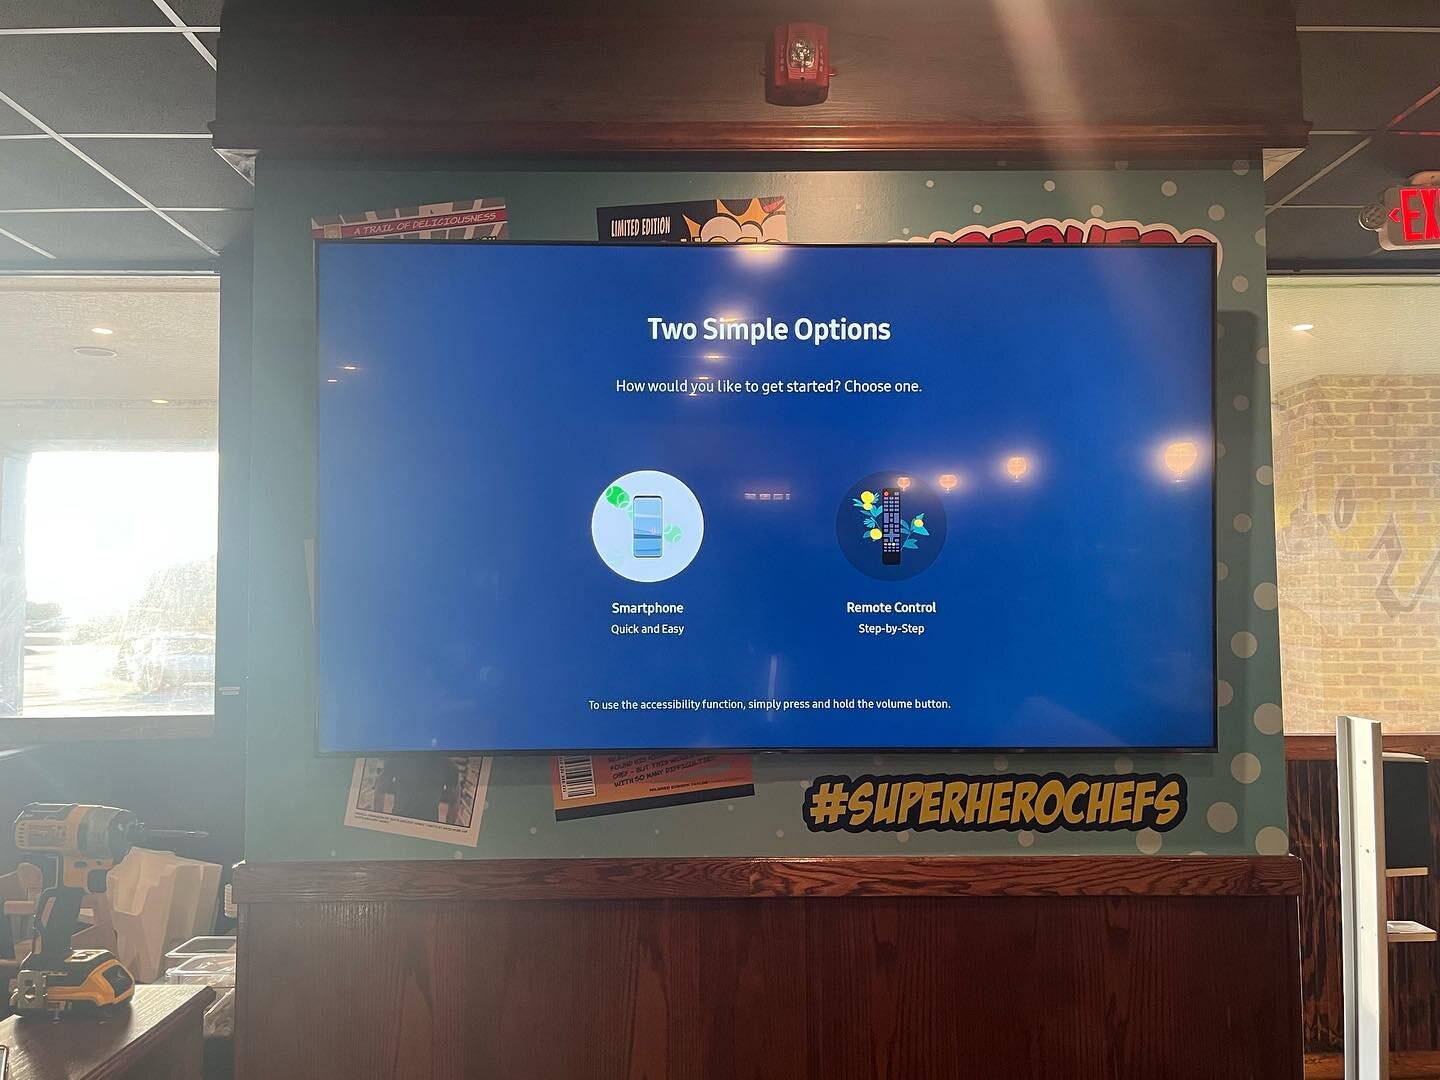 Thanks to our returning customers at Super Hero Chef&rsquo;s for allowing us to come in today and mount this 85&rsquo; Samsung on a full motion mount.  We also added a electrical outlet behind the unit to complete the look. 

We truly appreciate this